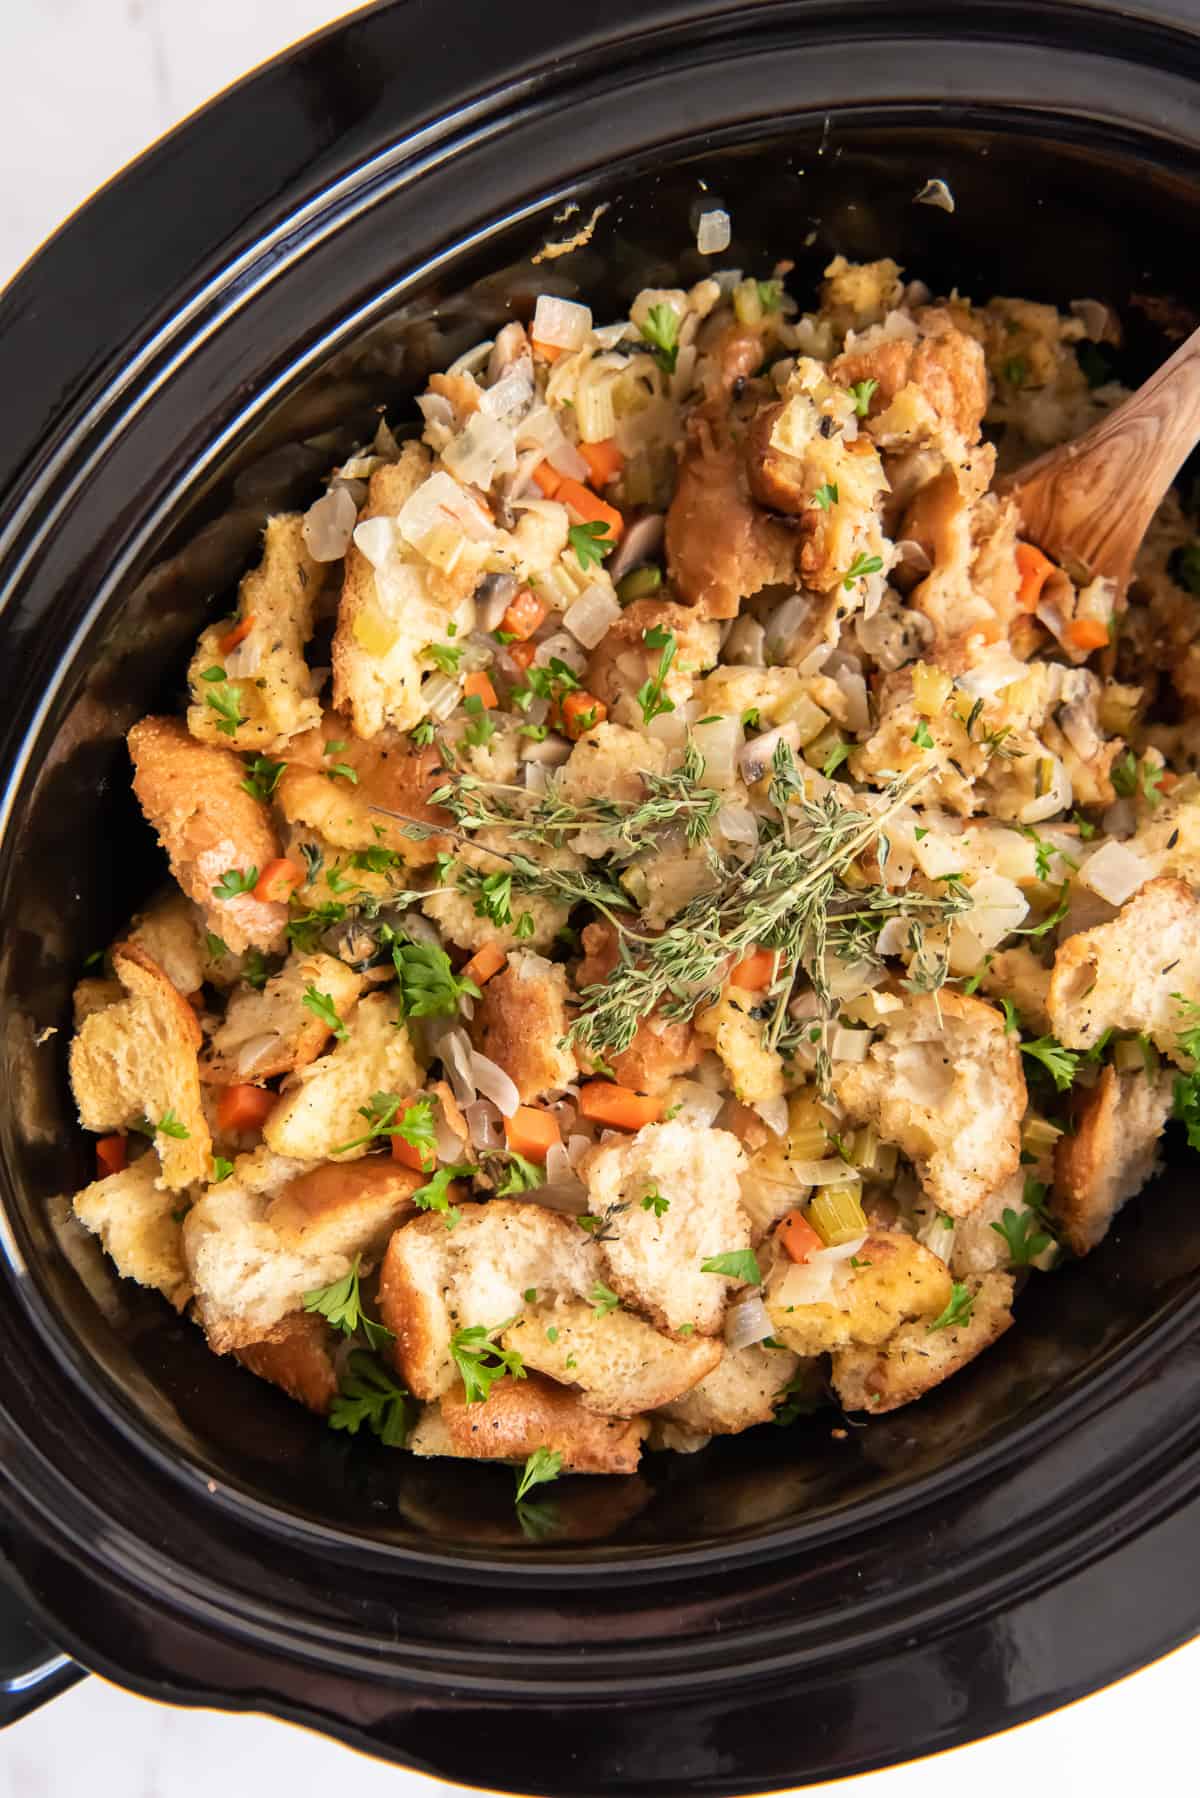 An over the top shot of stuffing in a slow cooker with a wooden spoon.